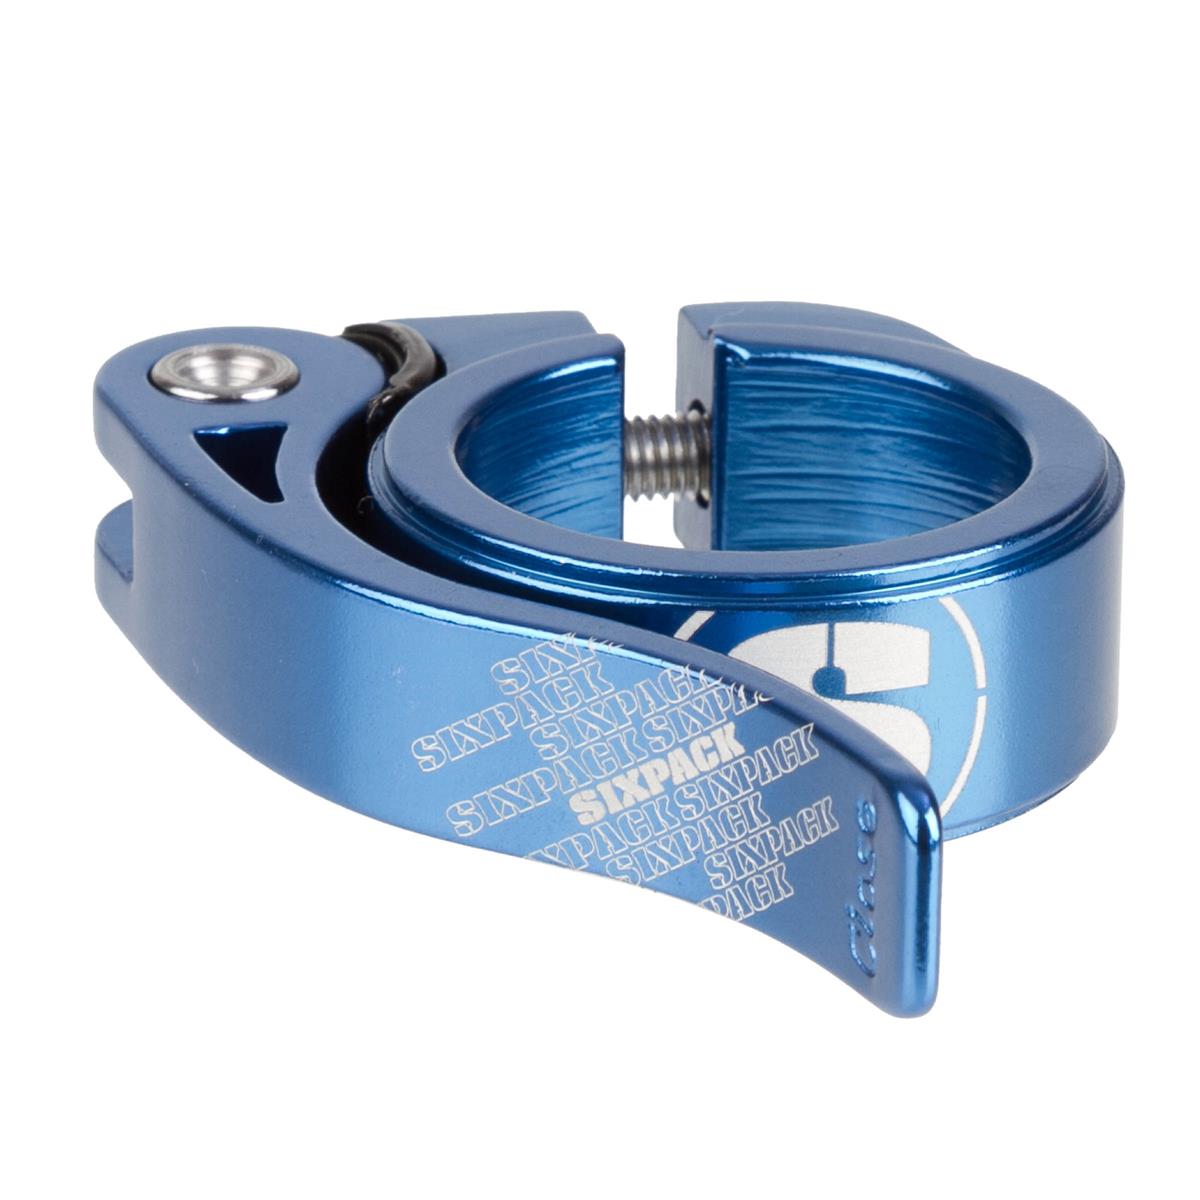 Sixpack Seat Clamp  Blue, 31.8 mm, Quick-Relese